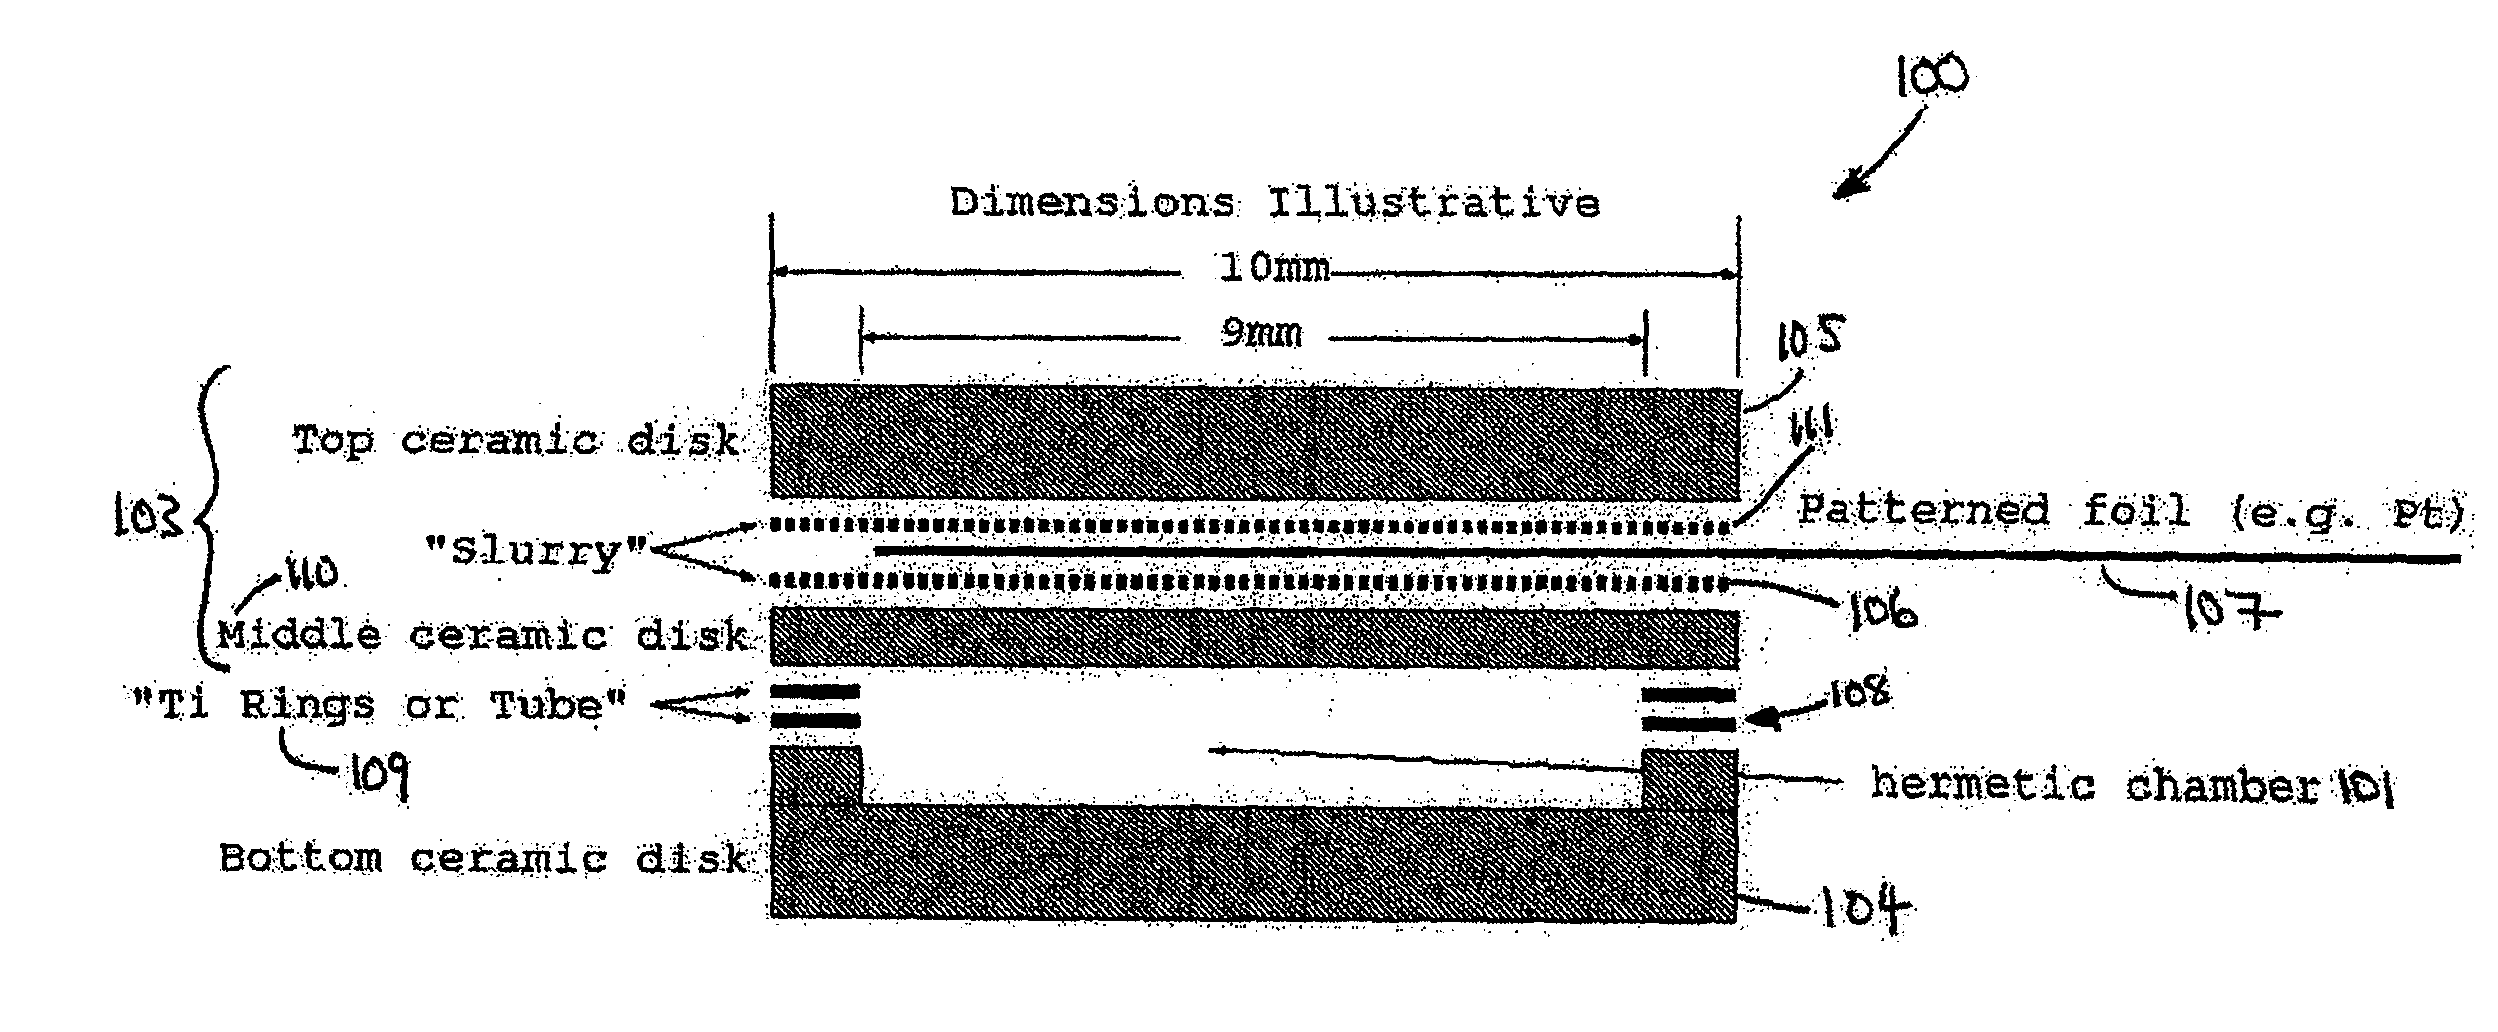 Method for fabrication of hermetic electrical conductor feedthroughs